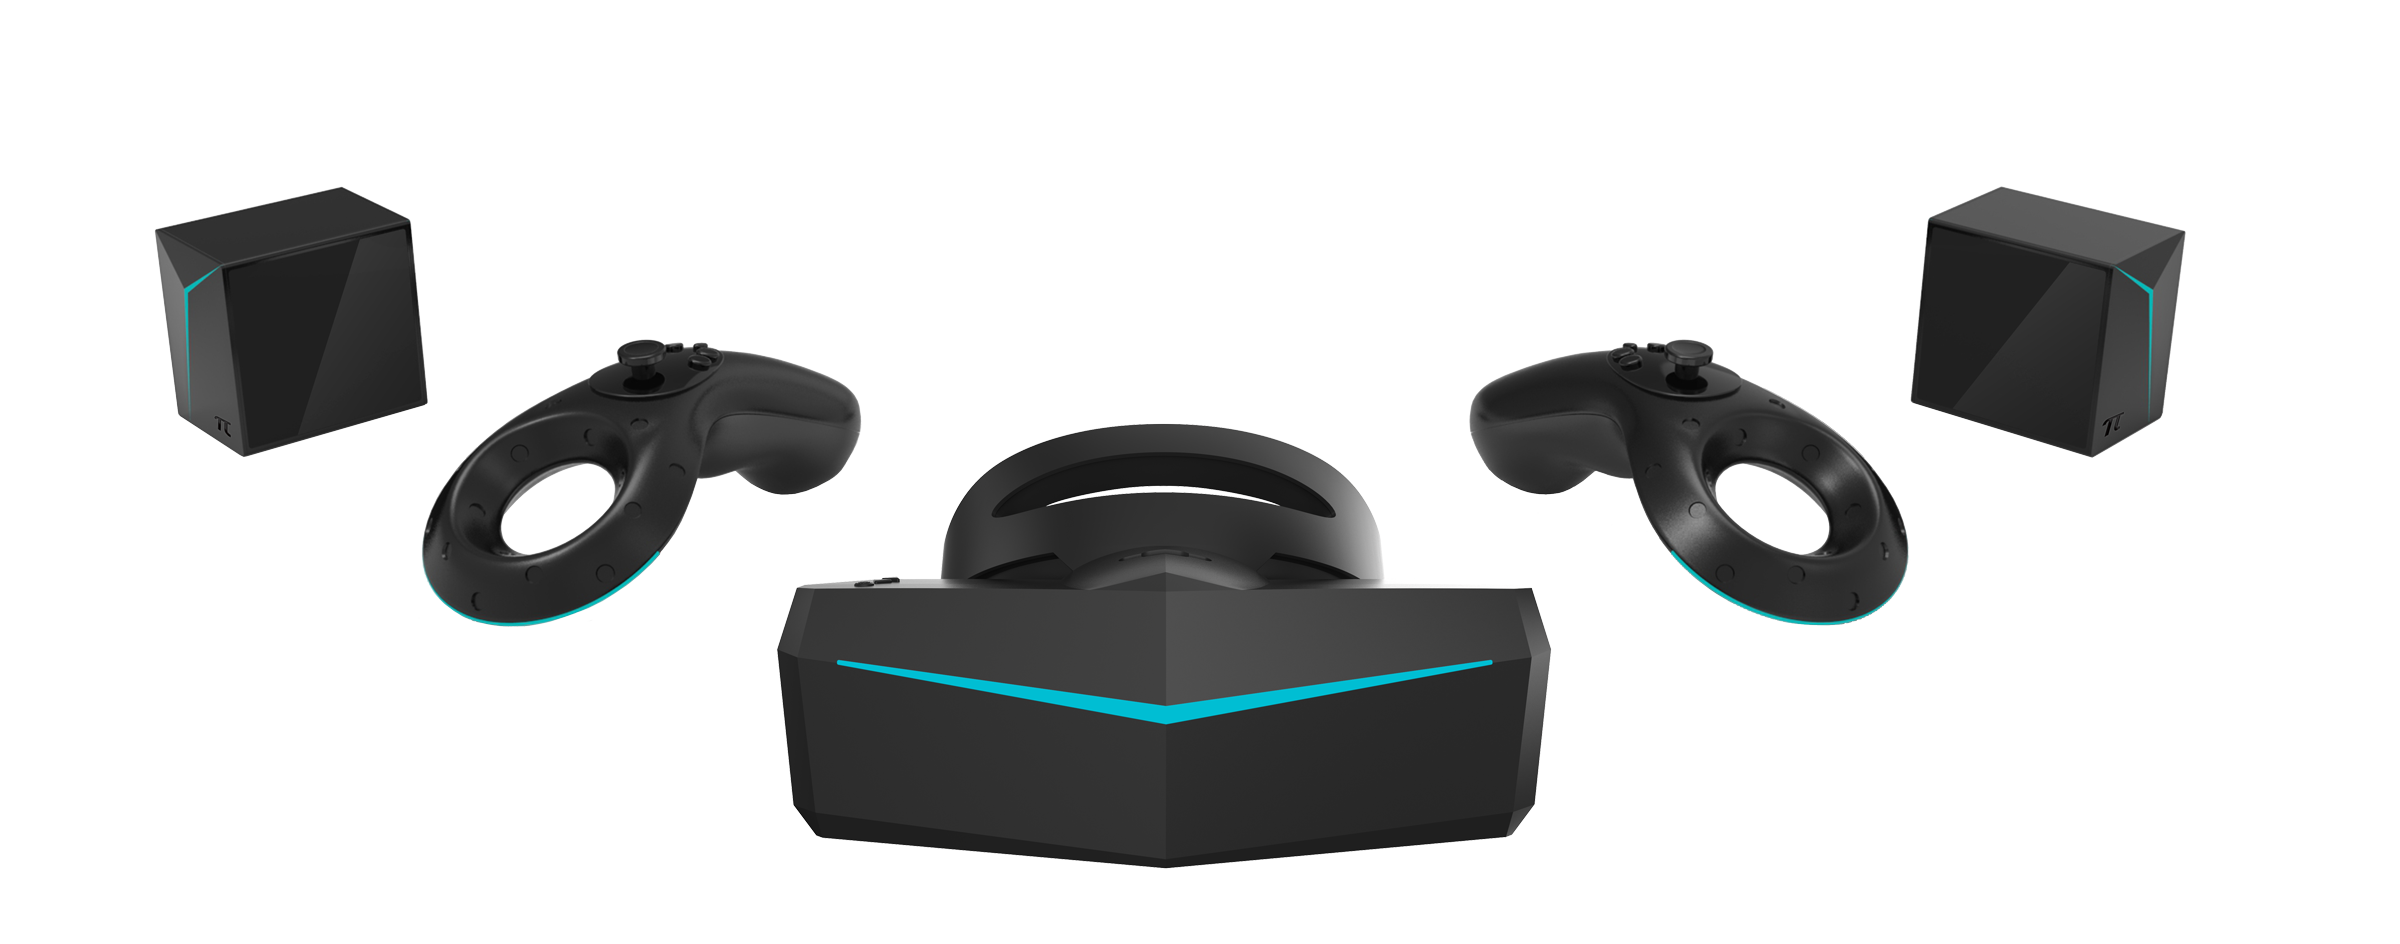 pimax oculus touch